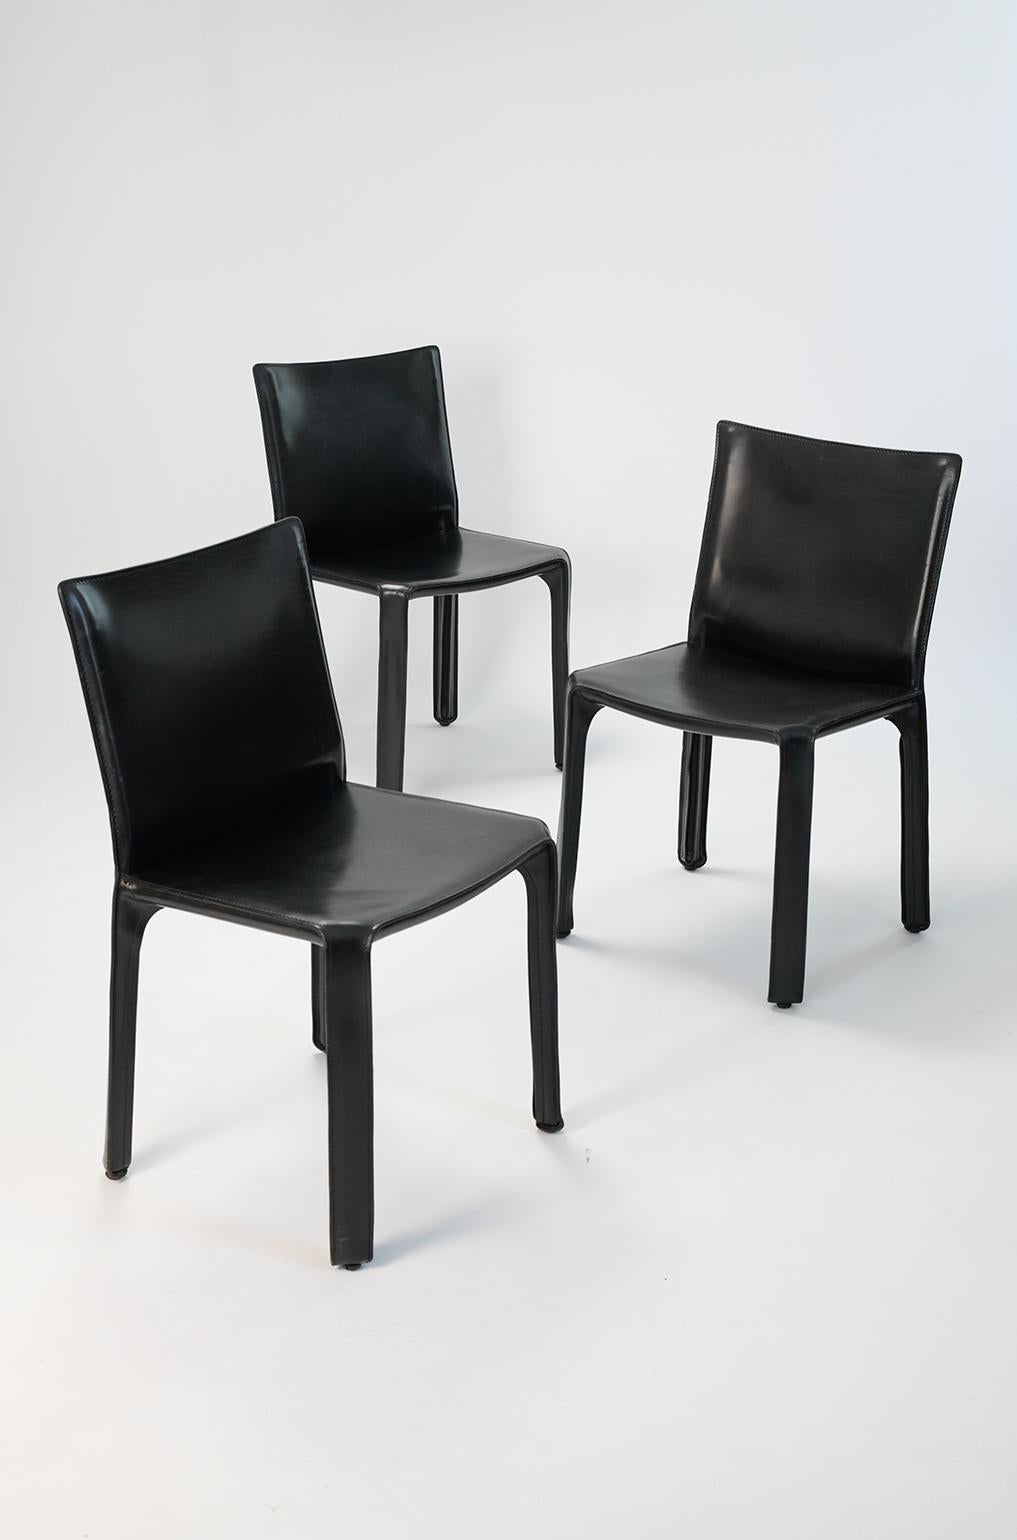 20th Century Mario Bellini Cab Chairs by Cassina - Set of Four  For Sale